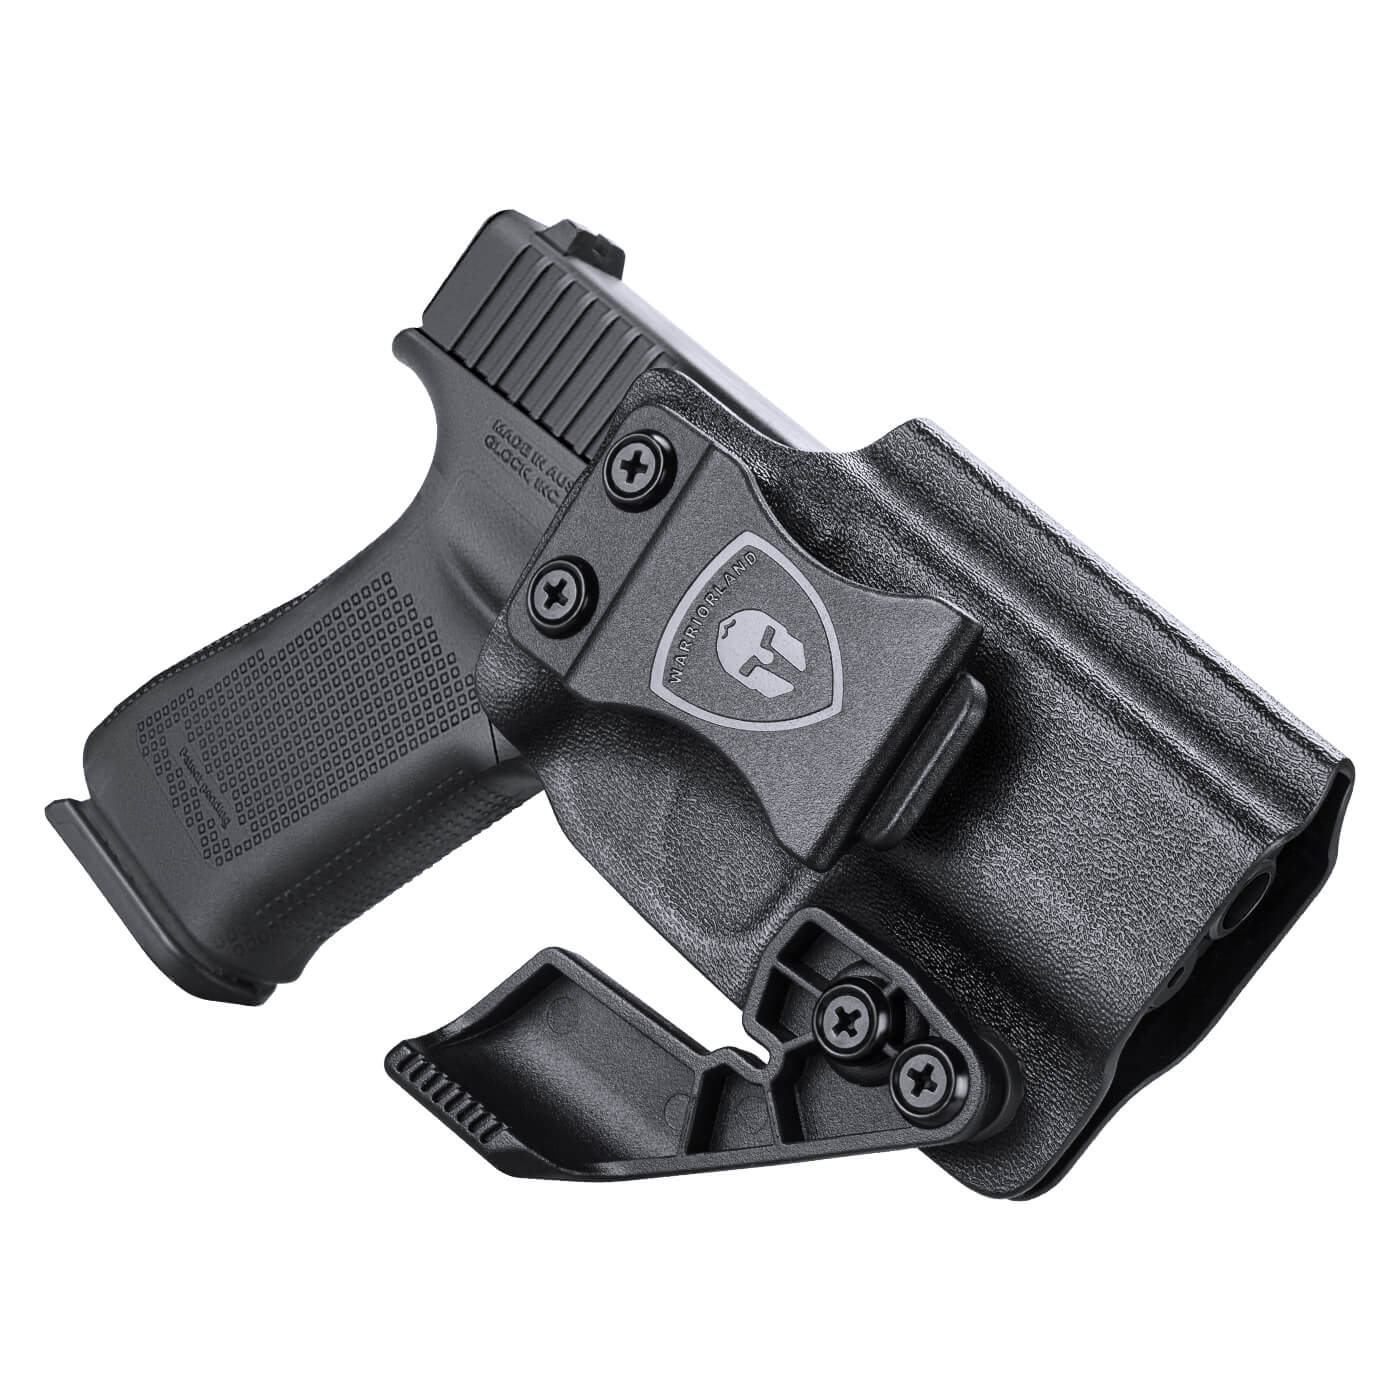  Tuckable KYDEX Belt Clip for Gun Holsters & Knife Sheaths –  (Fits 1.50” Belts) - (Non-Drilled) - (Inside-The-Waistband/IWB) - (Flush  Mount Design) - Mounting Hardware Included - (2 Pack) : Sports & Outdoors